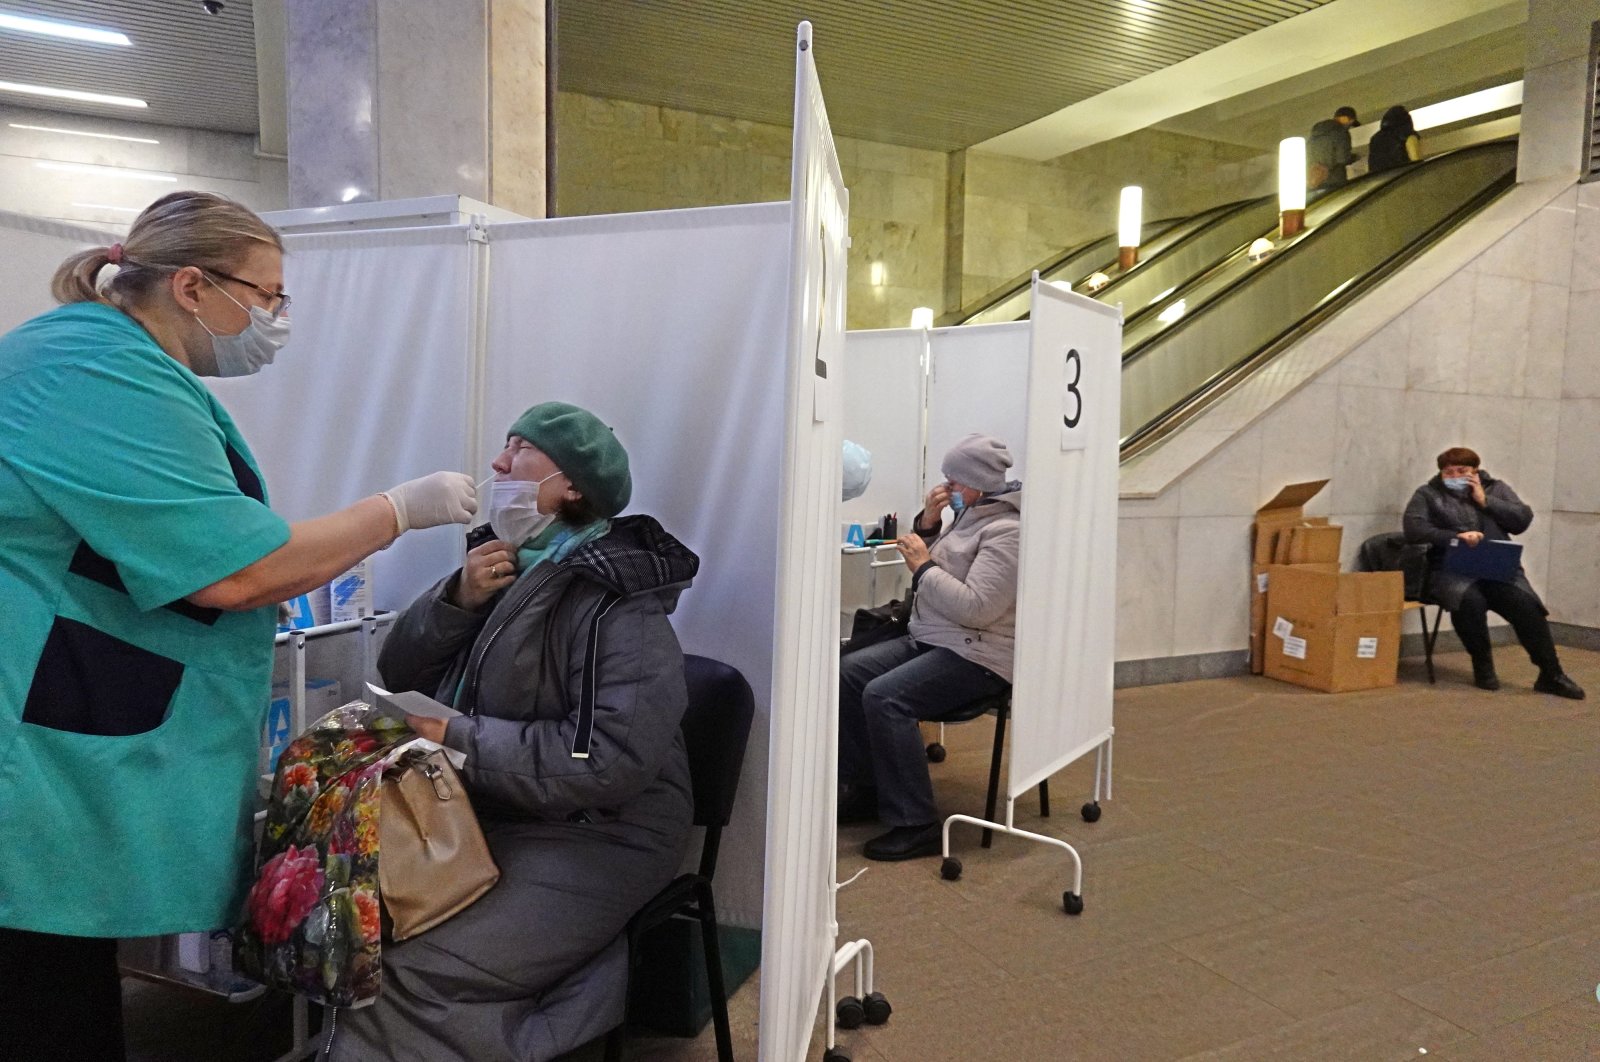 A woman undergoes COVID-19 testing at a "coronavirus express test point" in a Metro during coronavirus pandemic in Moscow, Russia, Nov. 3, 2021. (EPA Photo)